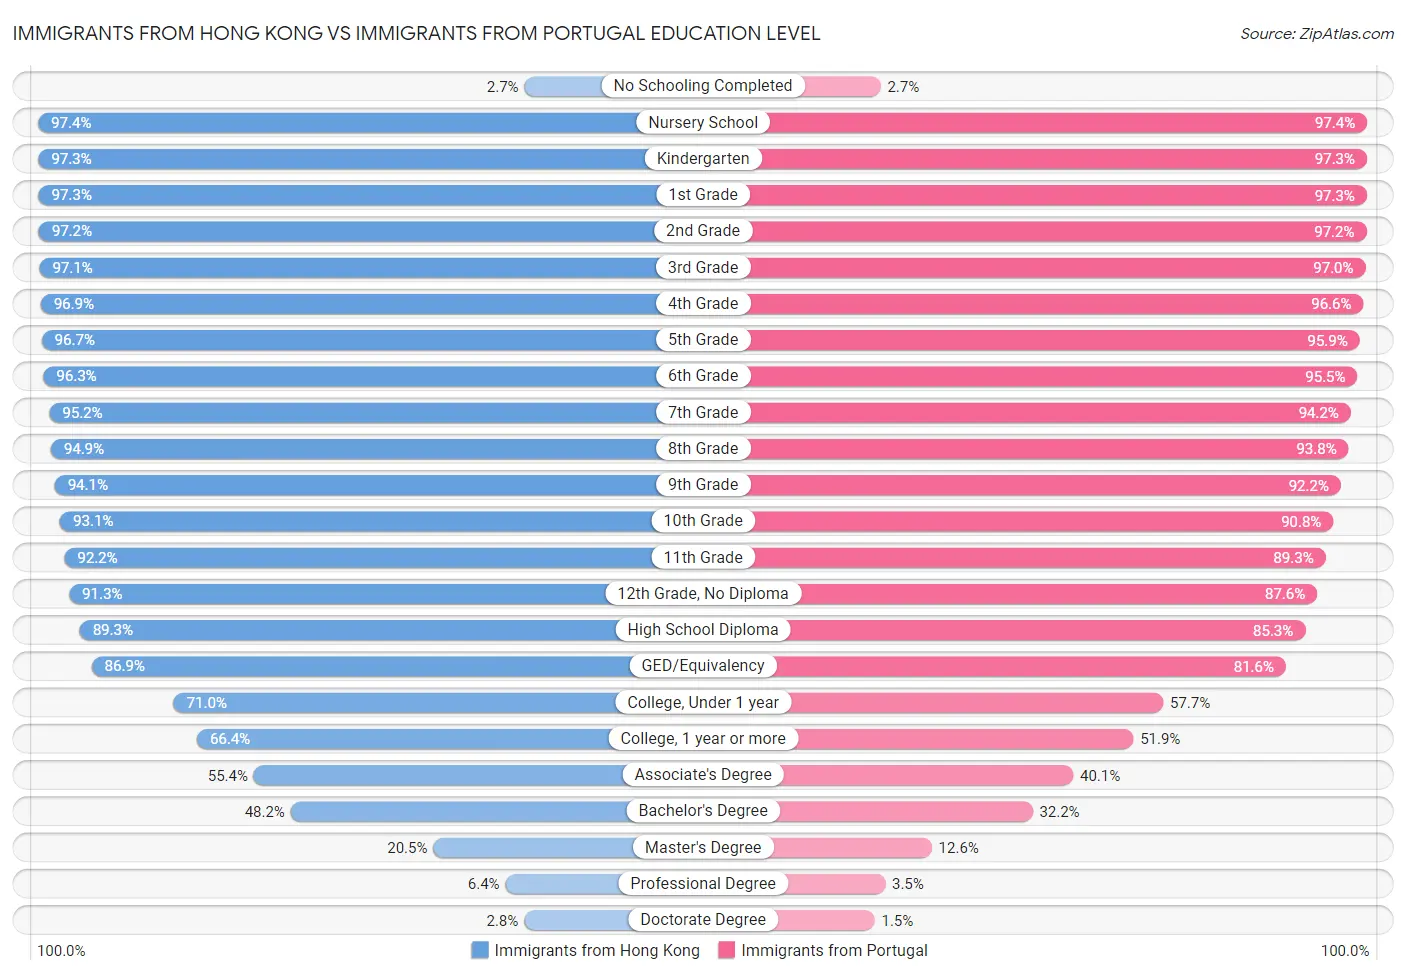 Immigrants from Hong Kong vs Immigrants from Portugal Education Level